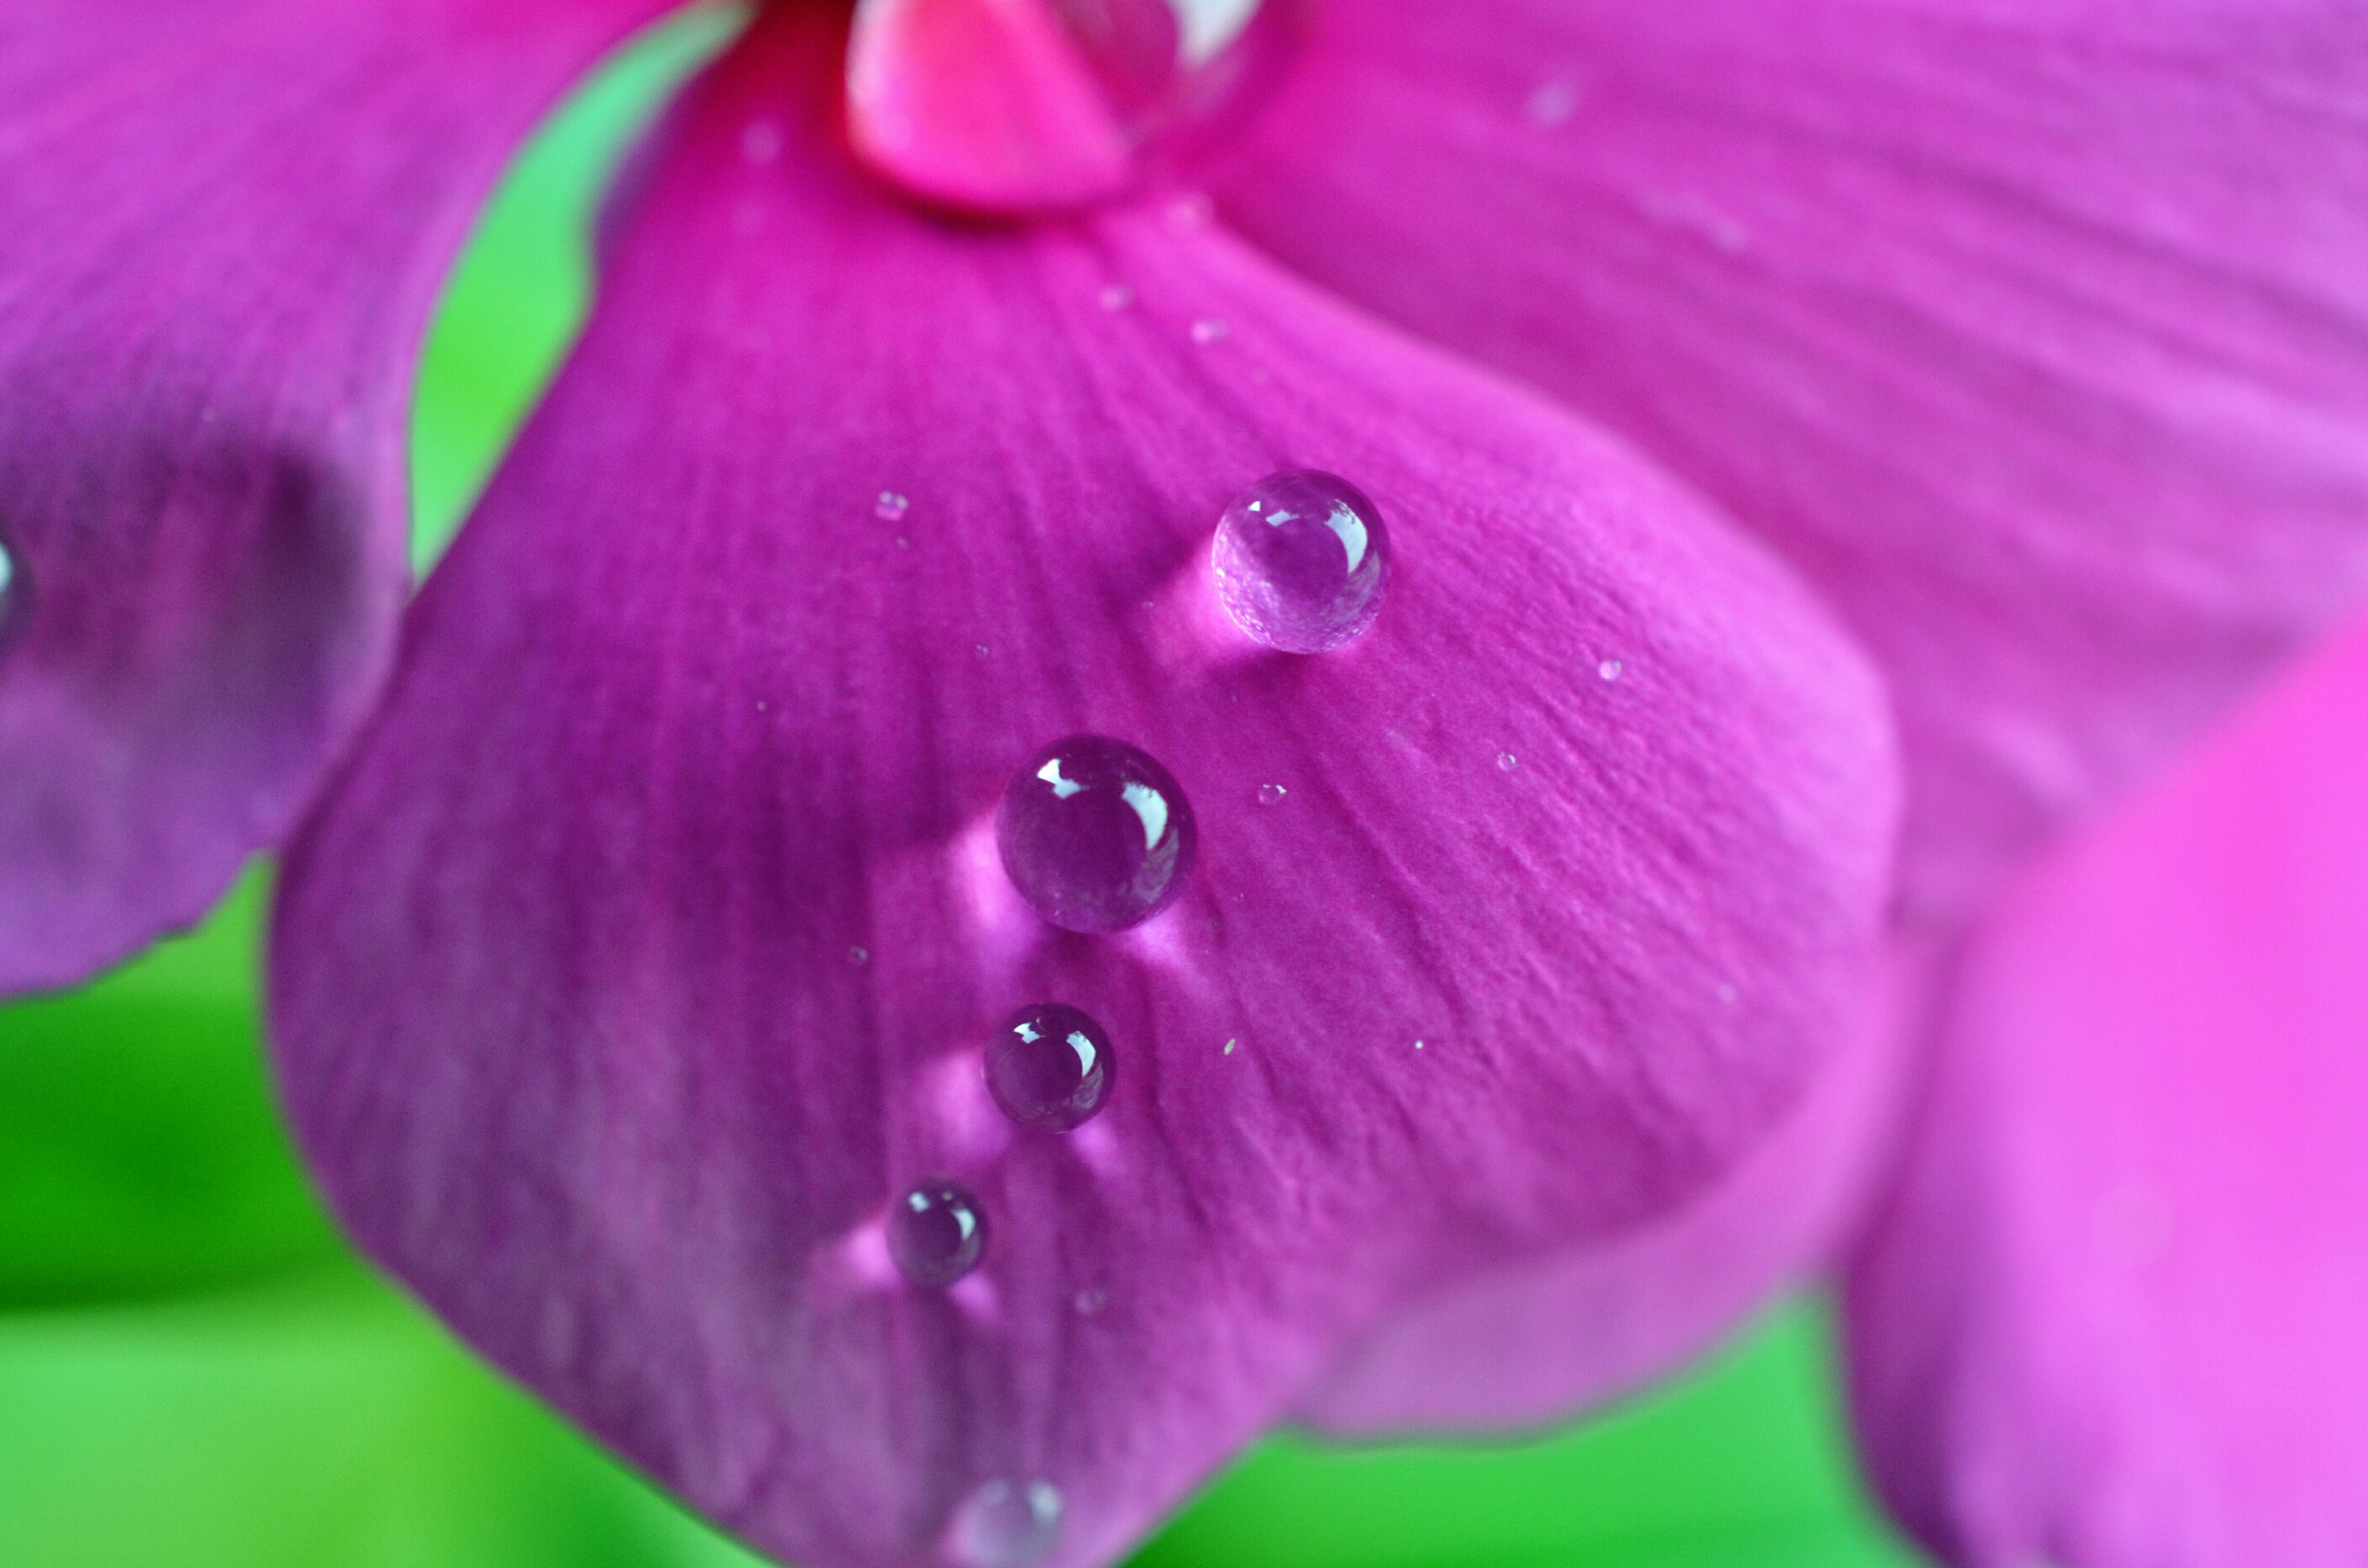 Droplets of yes and no#Droplets #NaturePhotography #FlowerPhotography #40mm #Nikon